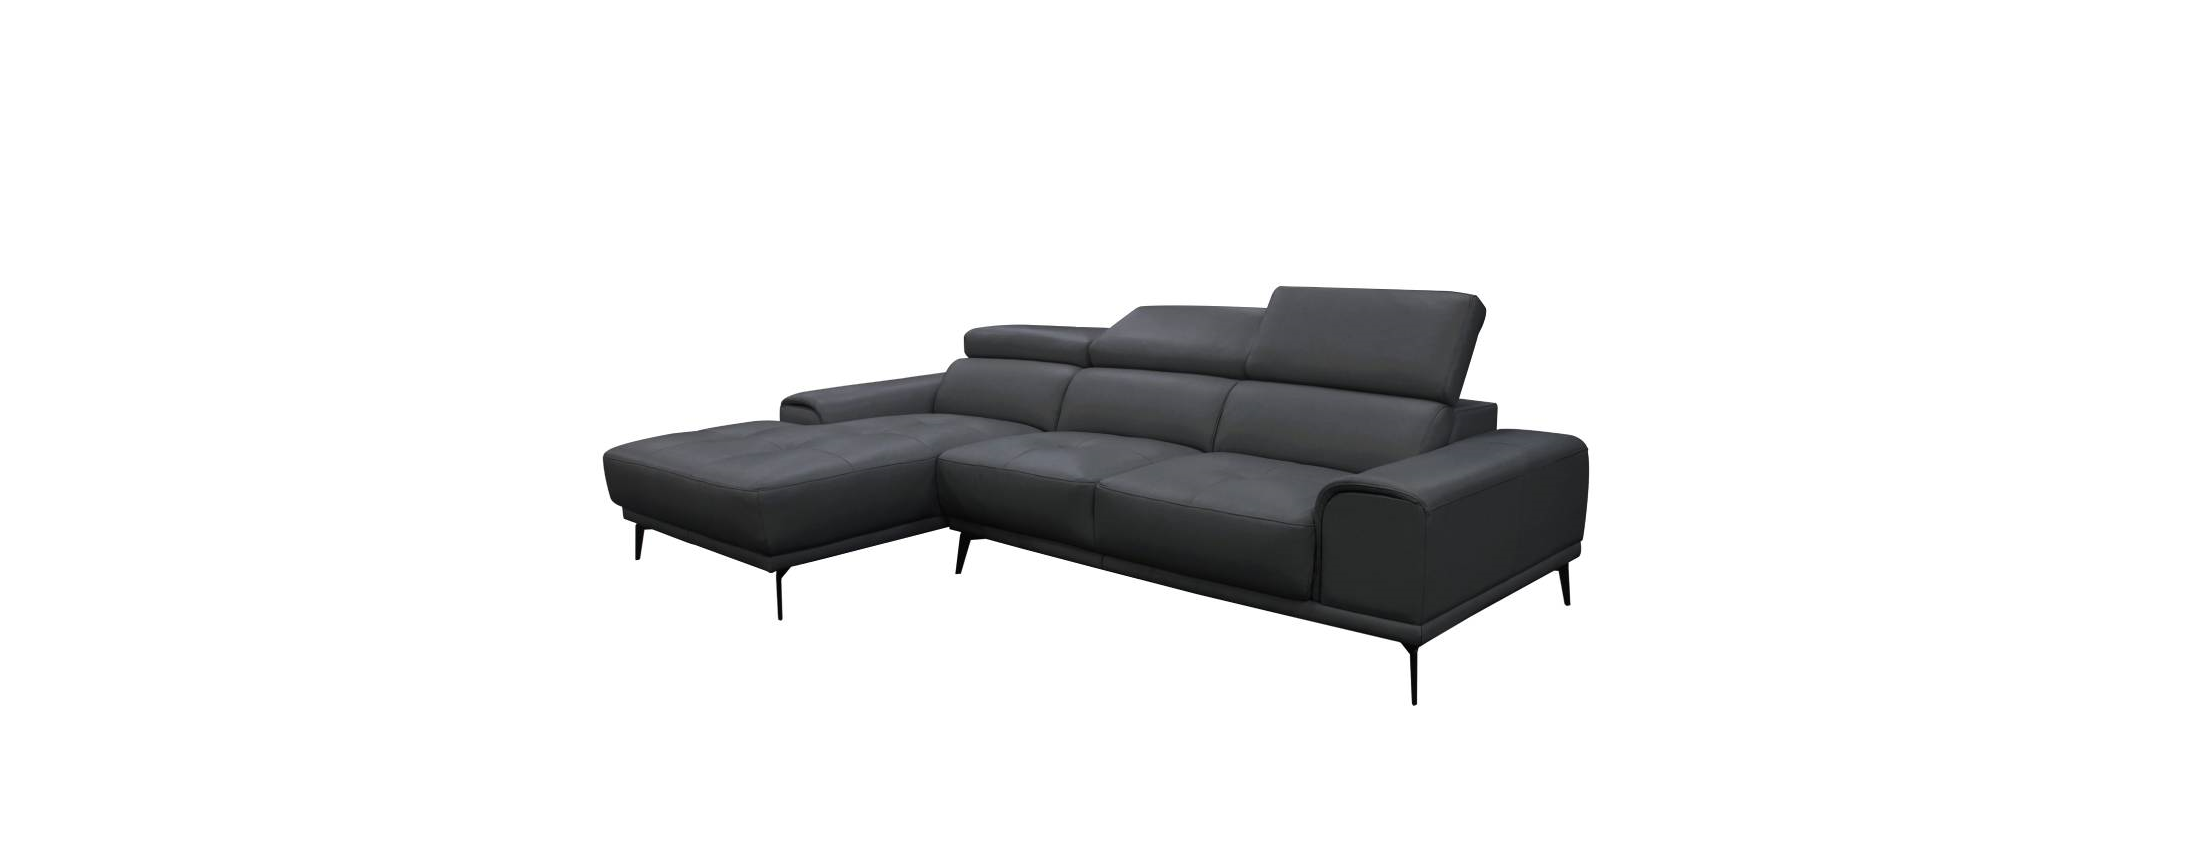 Shelby 3 Seater With Chaise